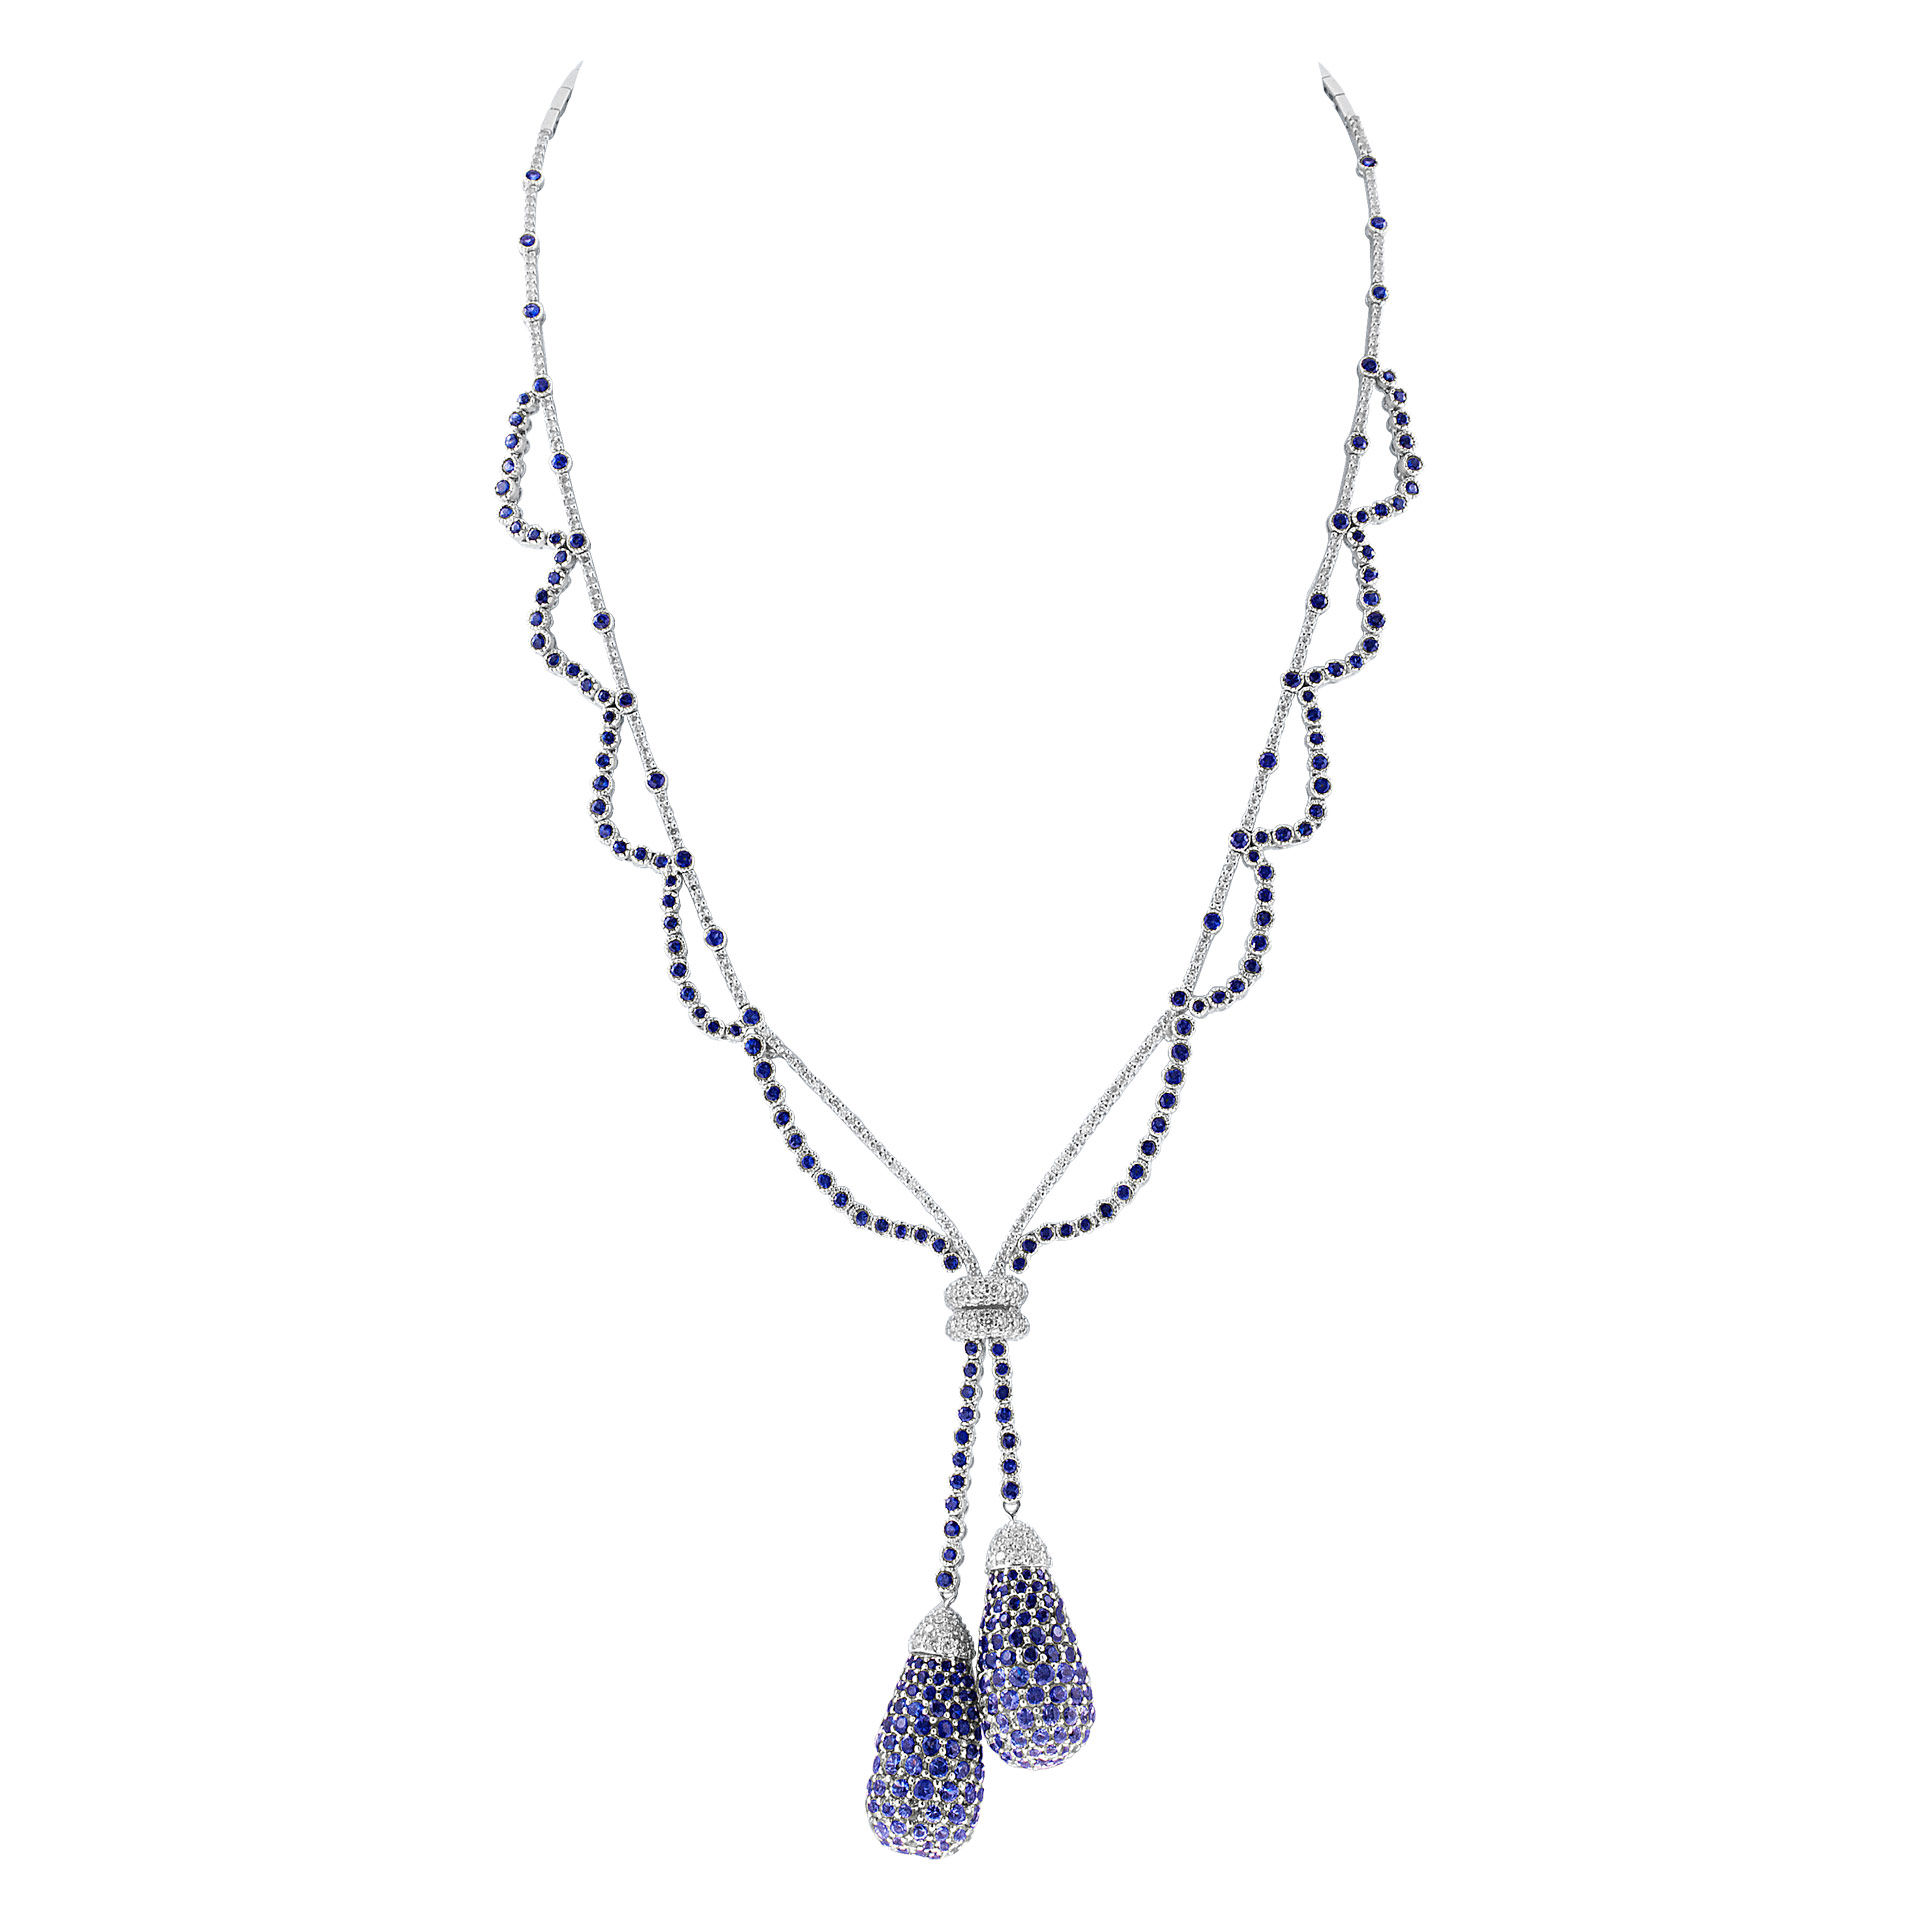 Sparkling diamond and blue sapphire necklace in 18k white gold